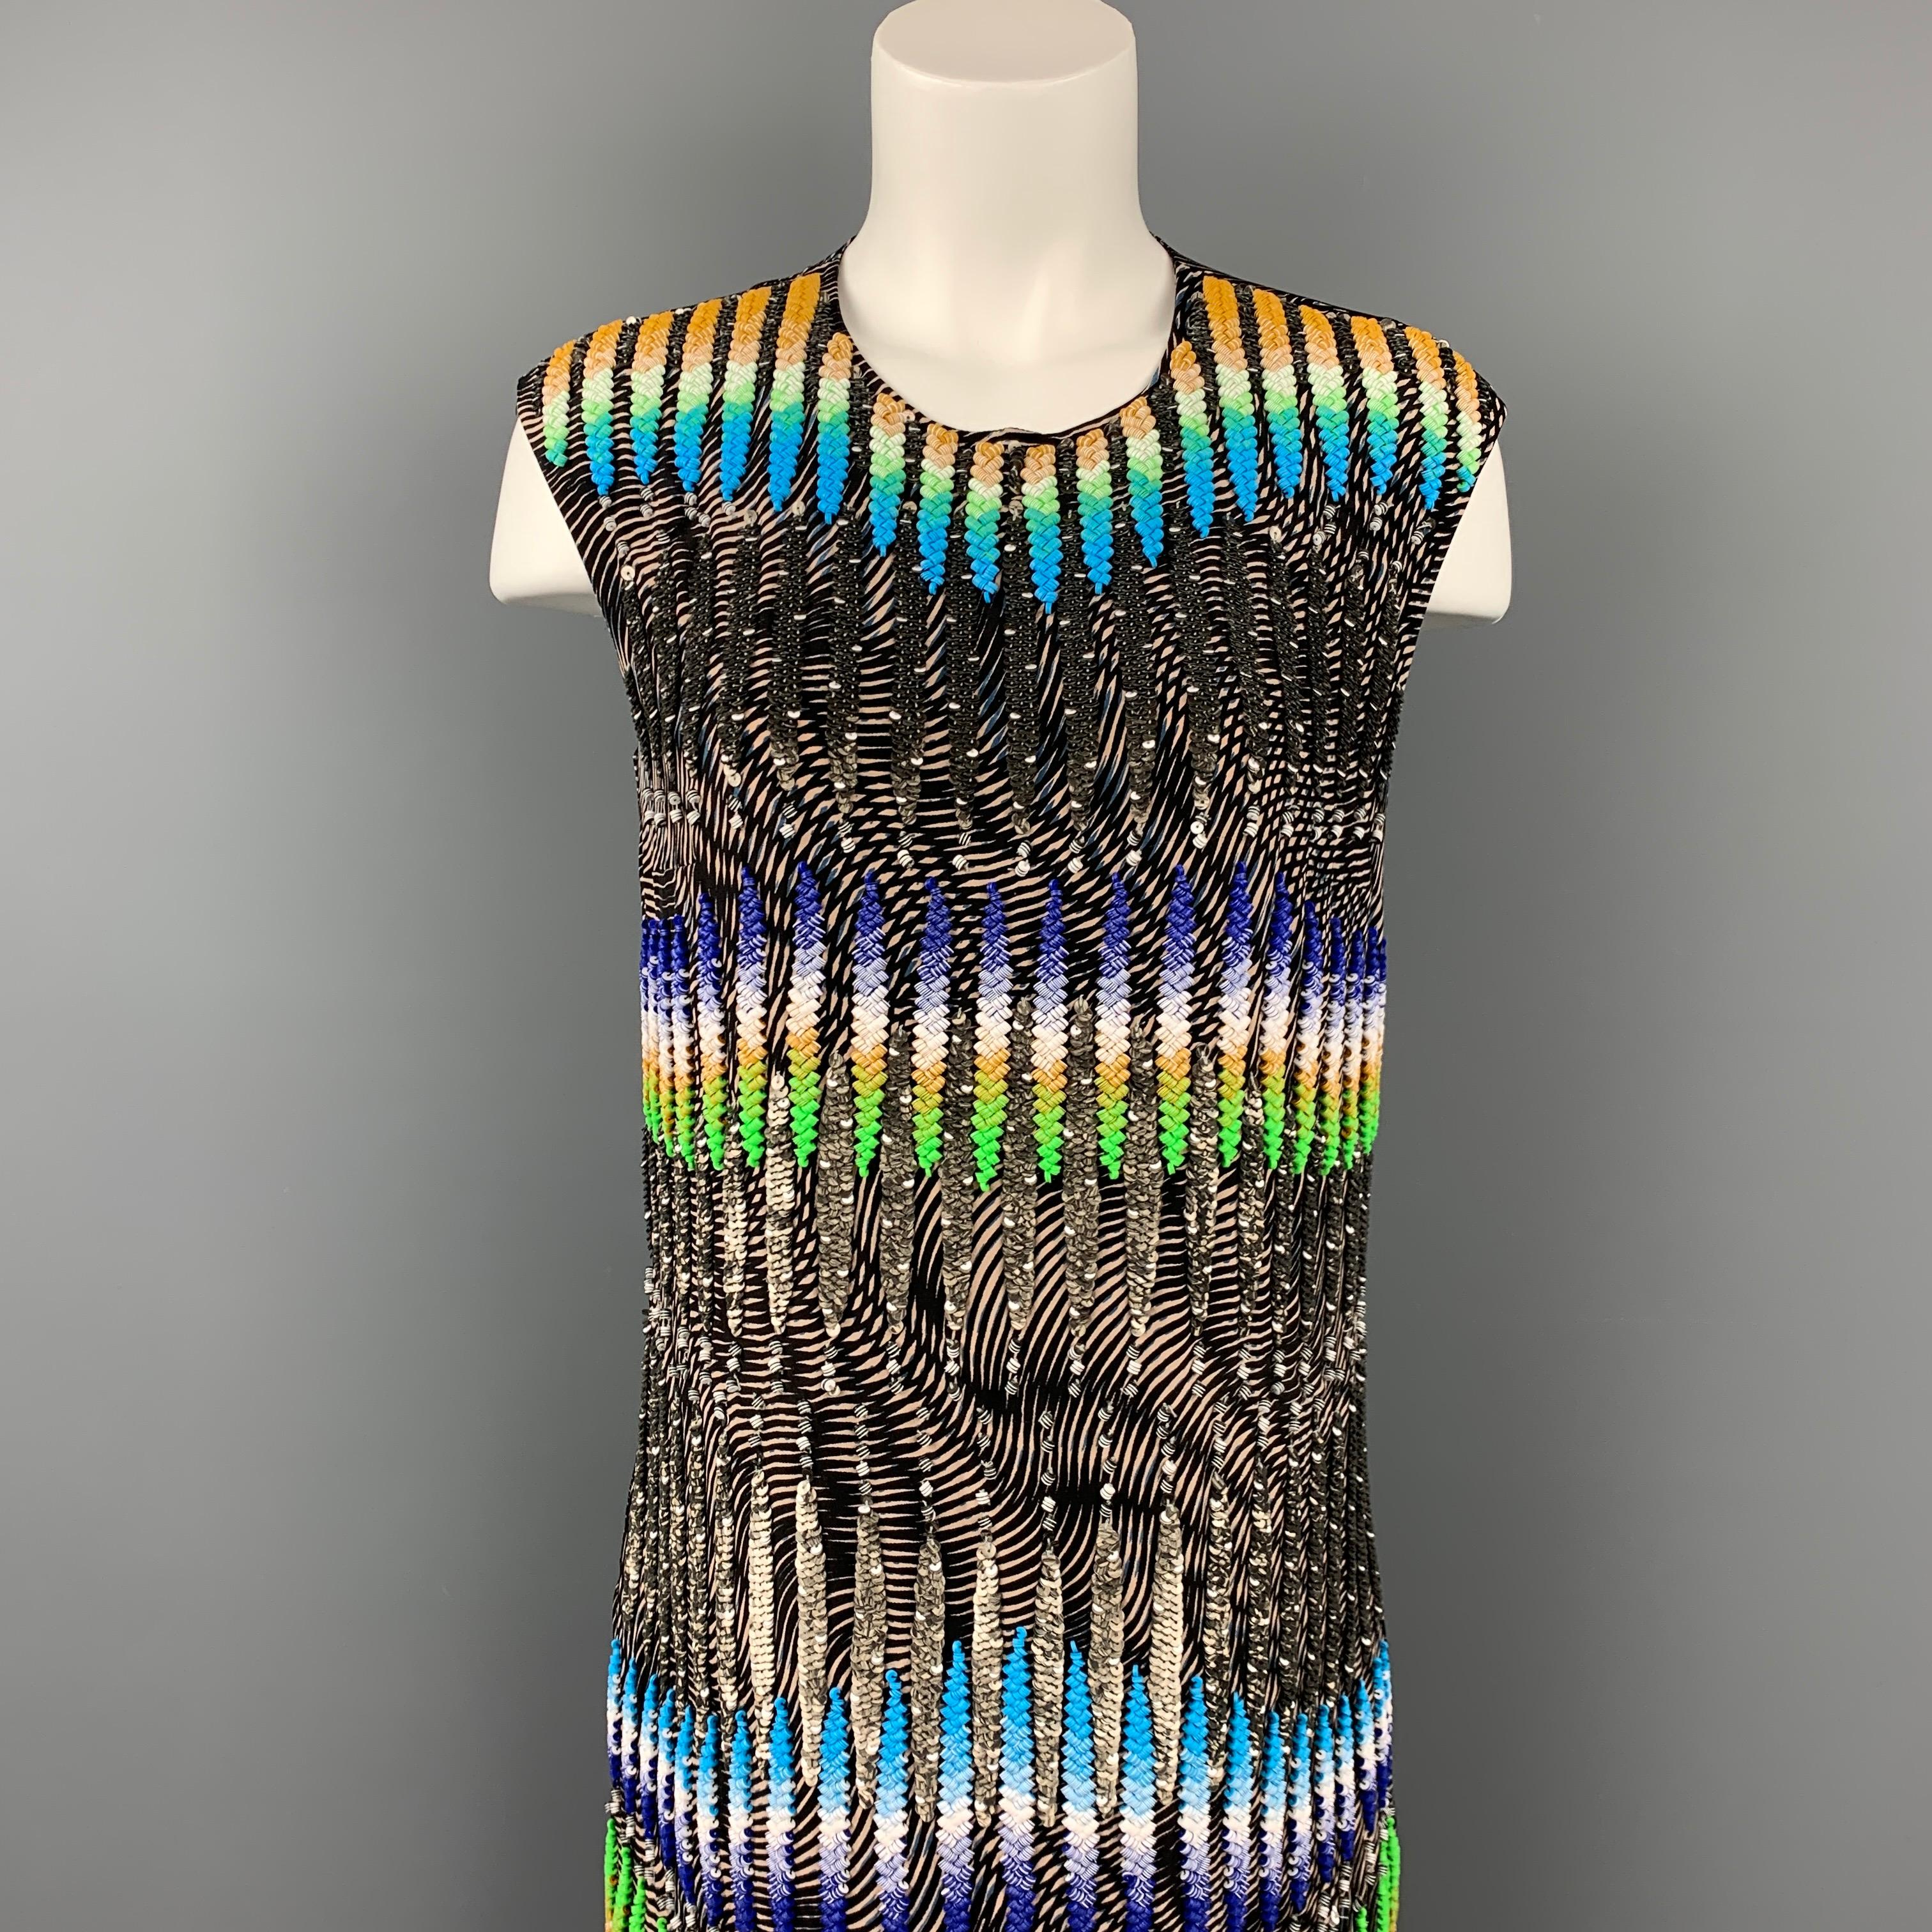 PETER PILOTTO dress comes in a black silk with sequined details featuring beaded designs made by hand, shift style, sleeveless, and a back zip up closure. 

Very Good Pre-Owned Condition.
Marked: 10
Original Retail Price: